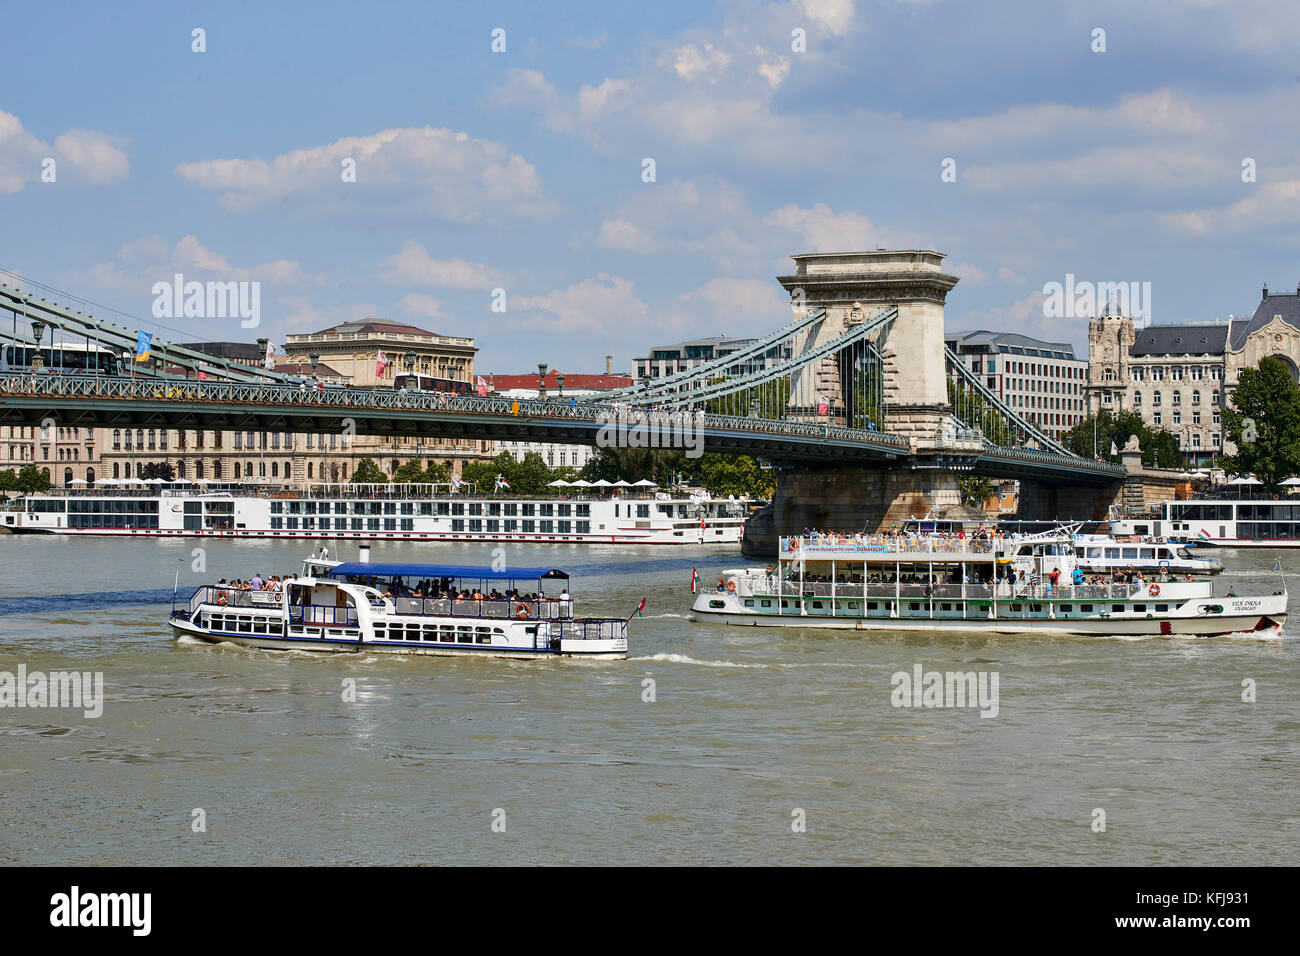 Chain link bridge Széchanyi Lánchid over the Danube, Budapest - with cuise ships on the river (Ven Duna Ex Gulacs, Hableani) Stock Photo